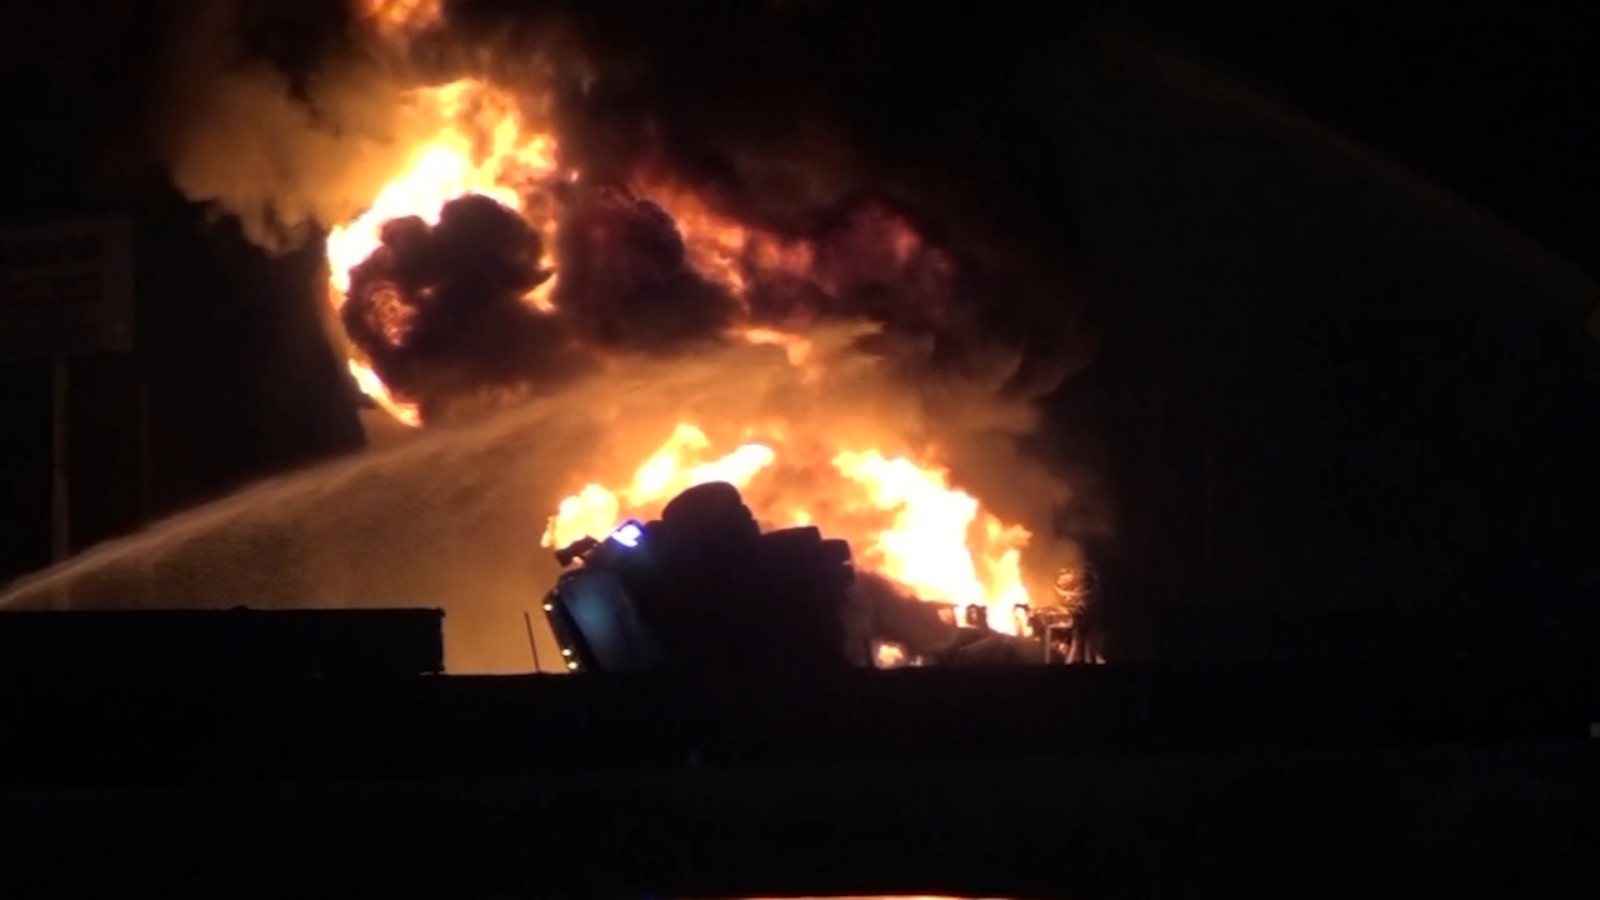 Gas tanker explosion: 18-wheeler bursts into flames after crash, causing explosion that shut down inbound lanes of I-45 [Video]